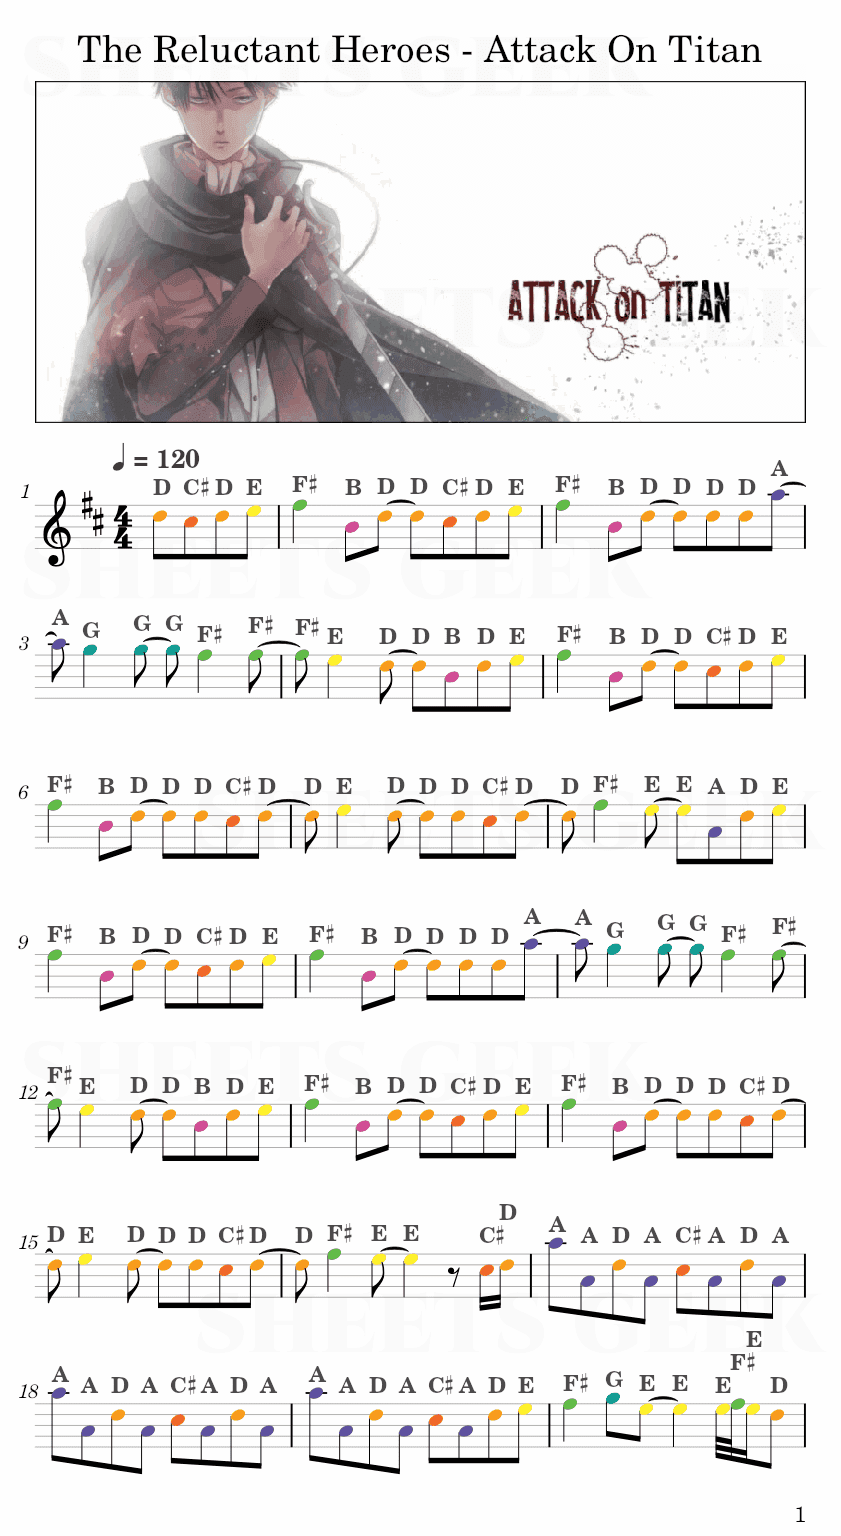 The Reluctant Heroes - Attack On Titan Easy Sheet Music Free for piano, keyboard, flute, violin, sax, cello page 1